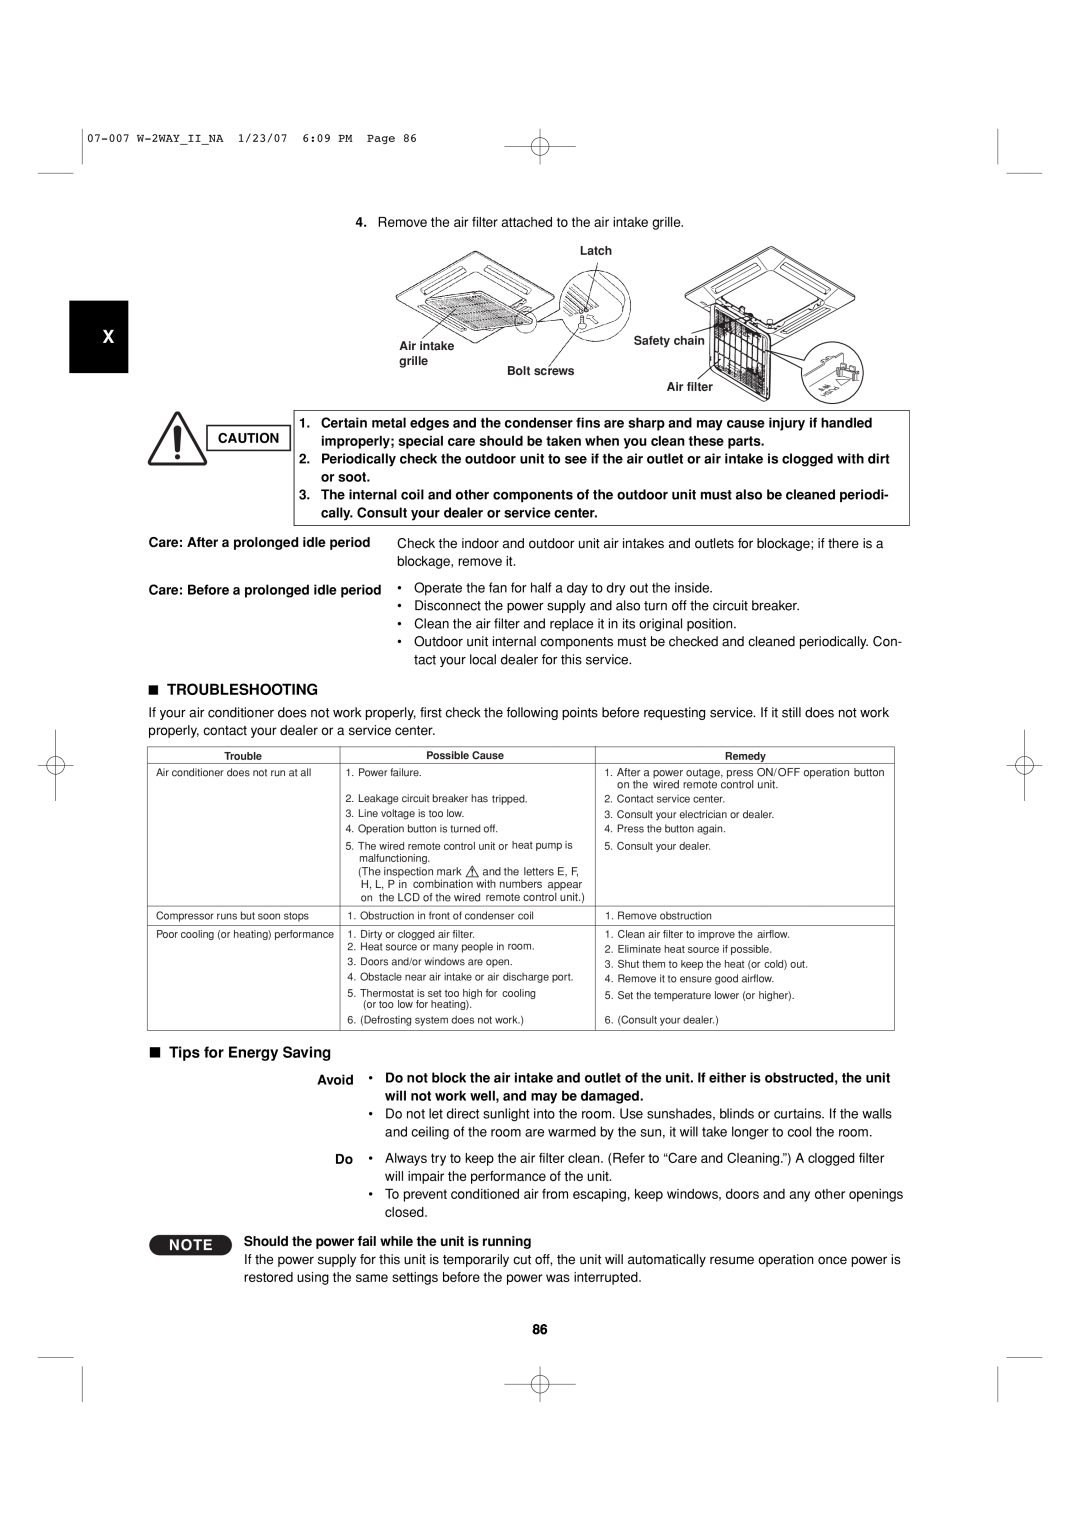 Sanyo 85464359982001 installation instructions Troubleshooting, Tips for Energy Saving 